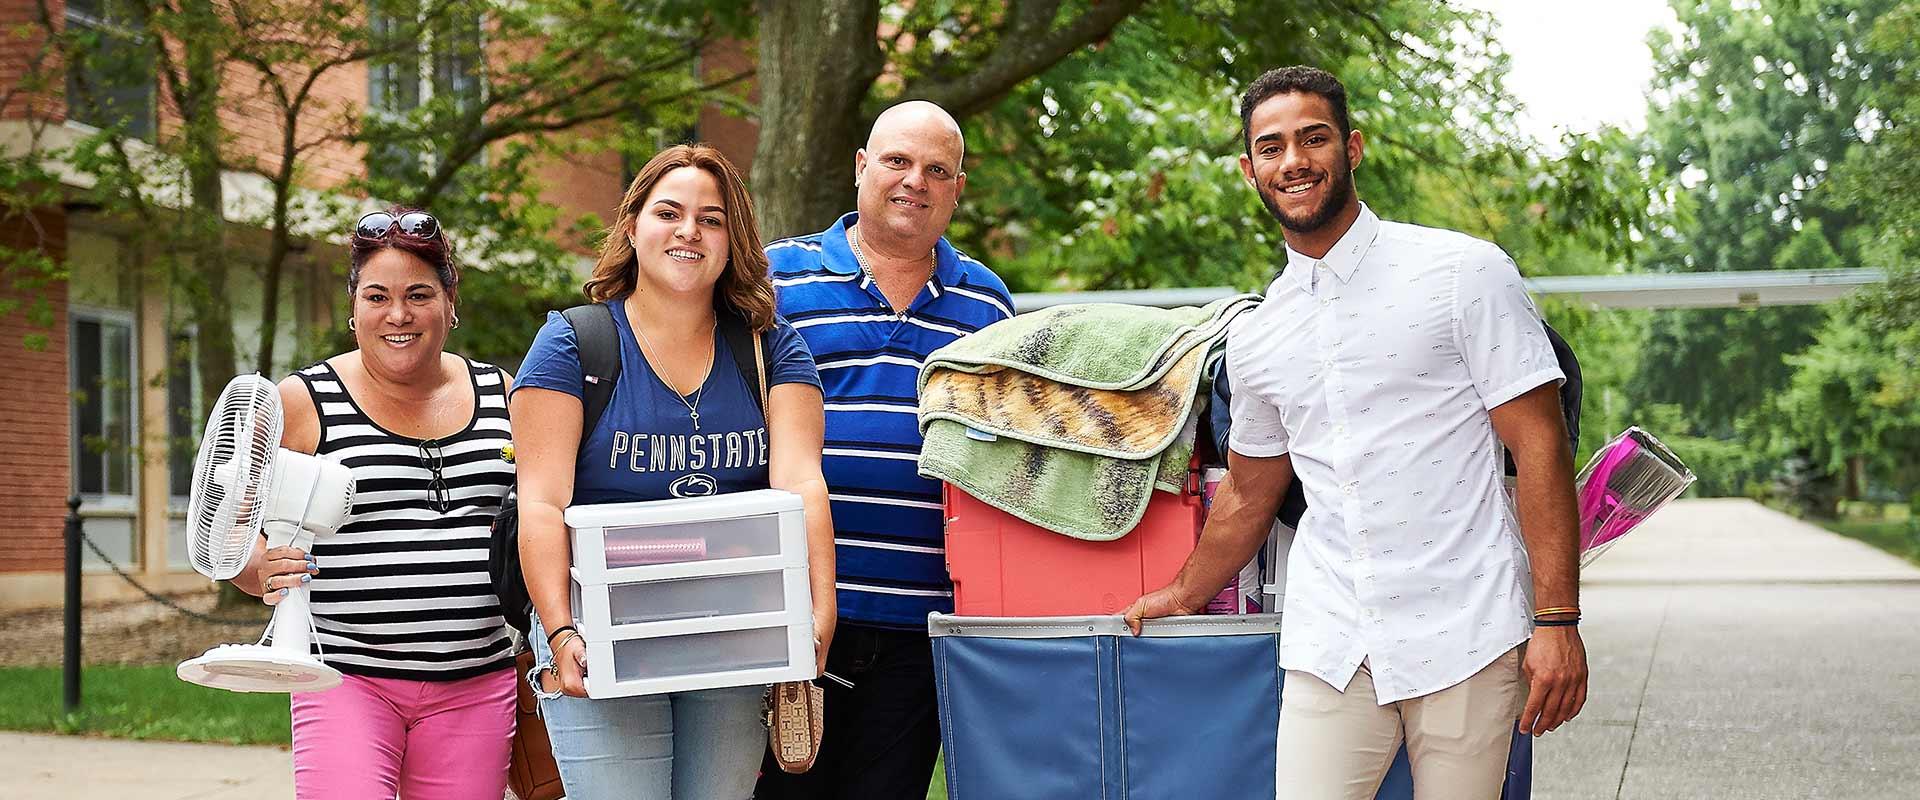 family poses with their belongings during arrival week